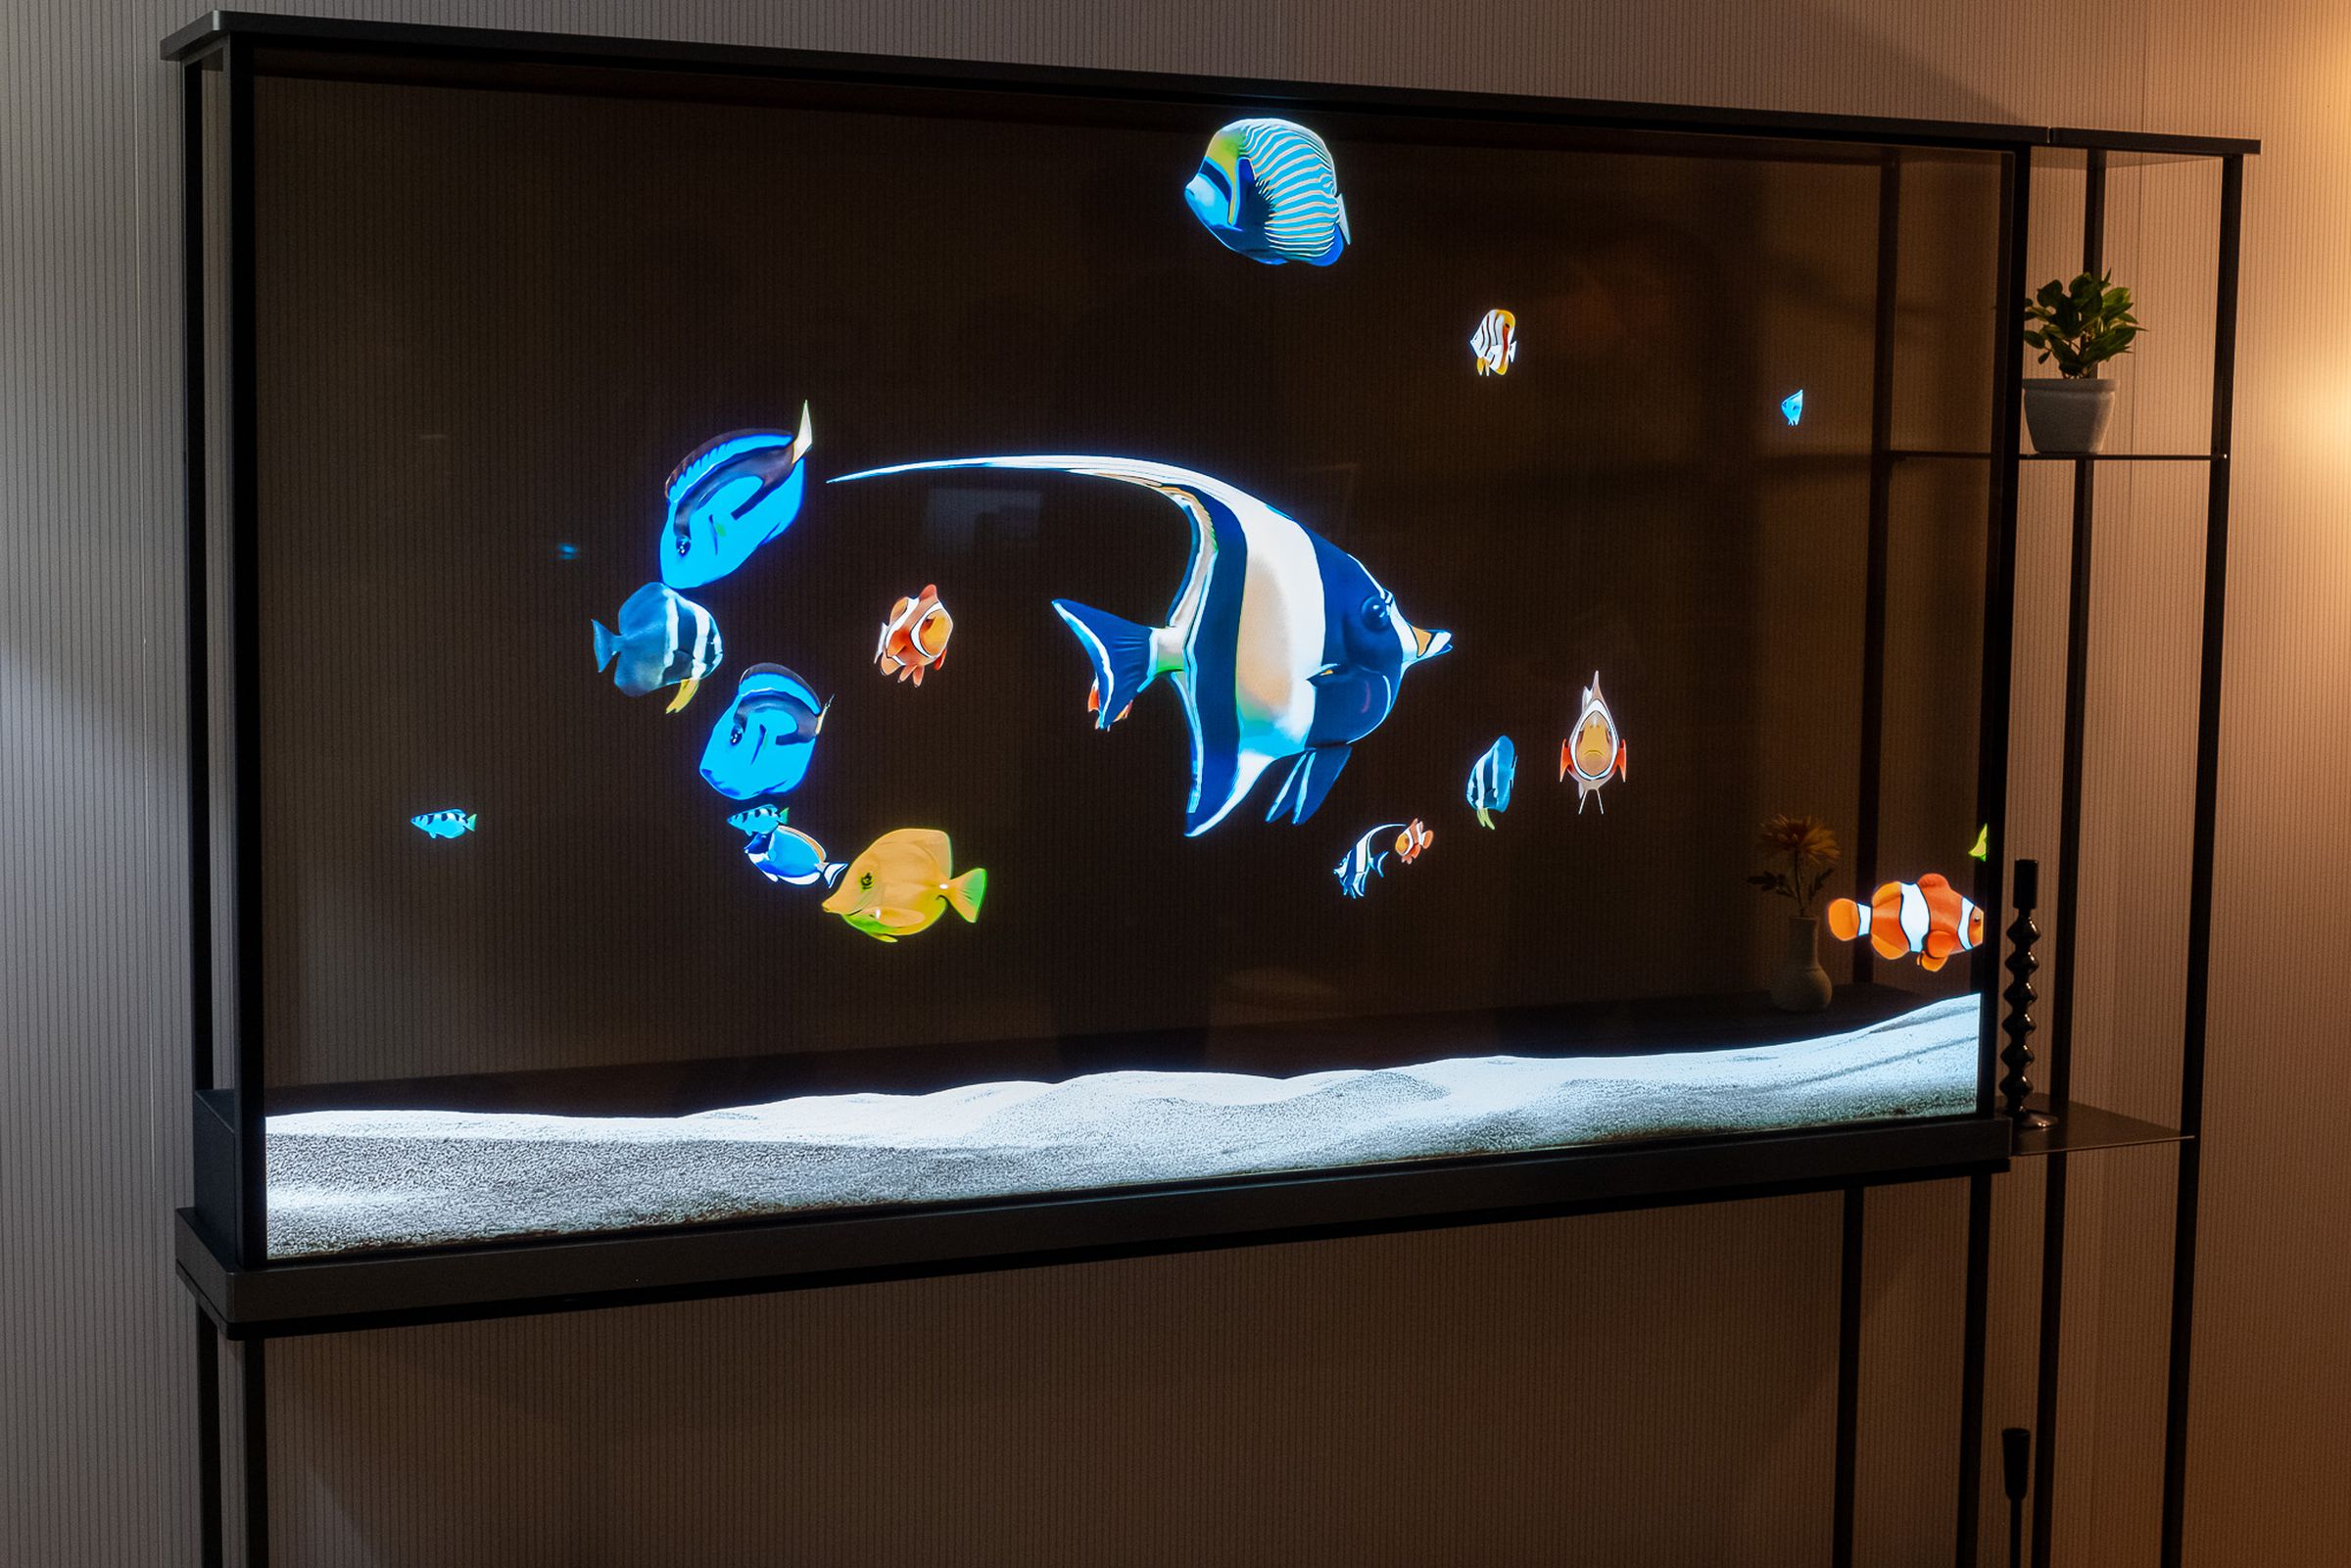 But can your TV morph into a fish tank? Decisions, decisions.